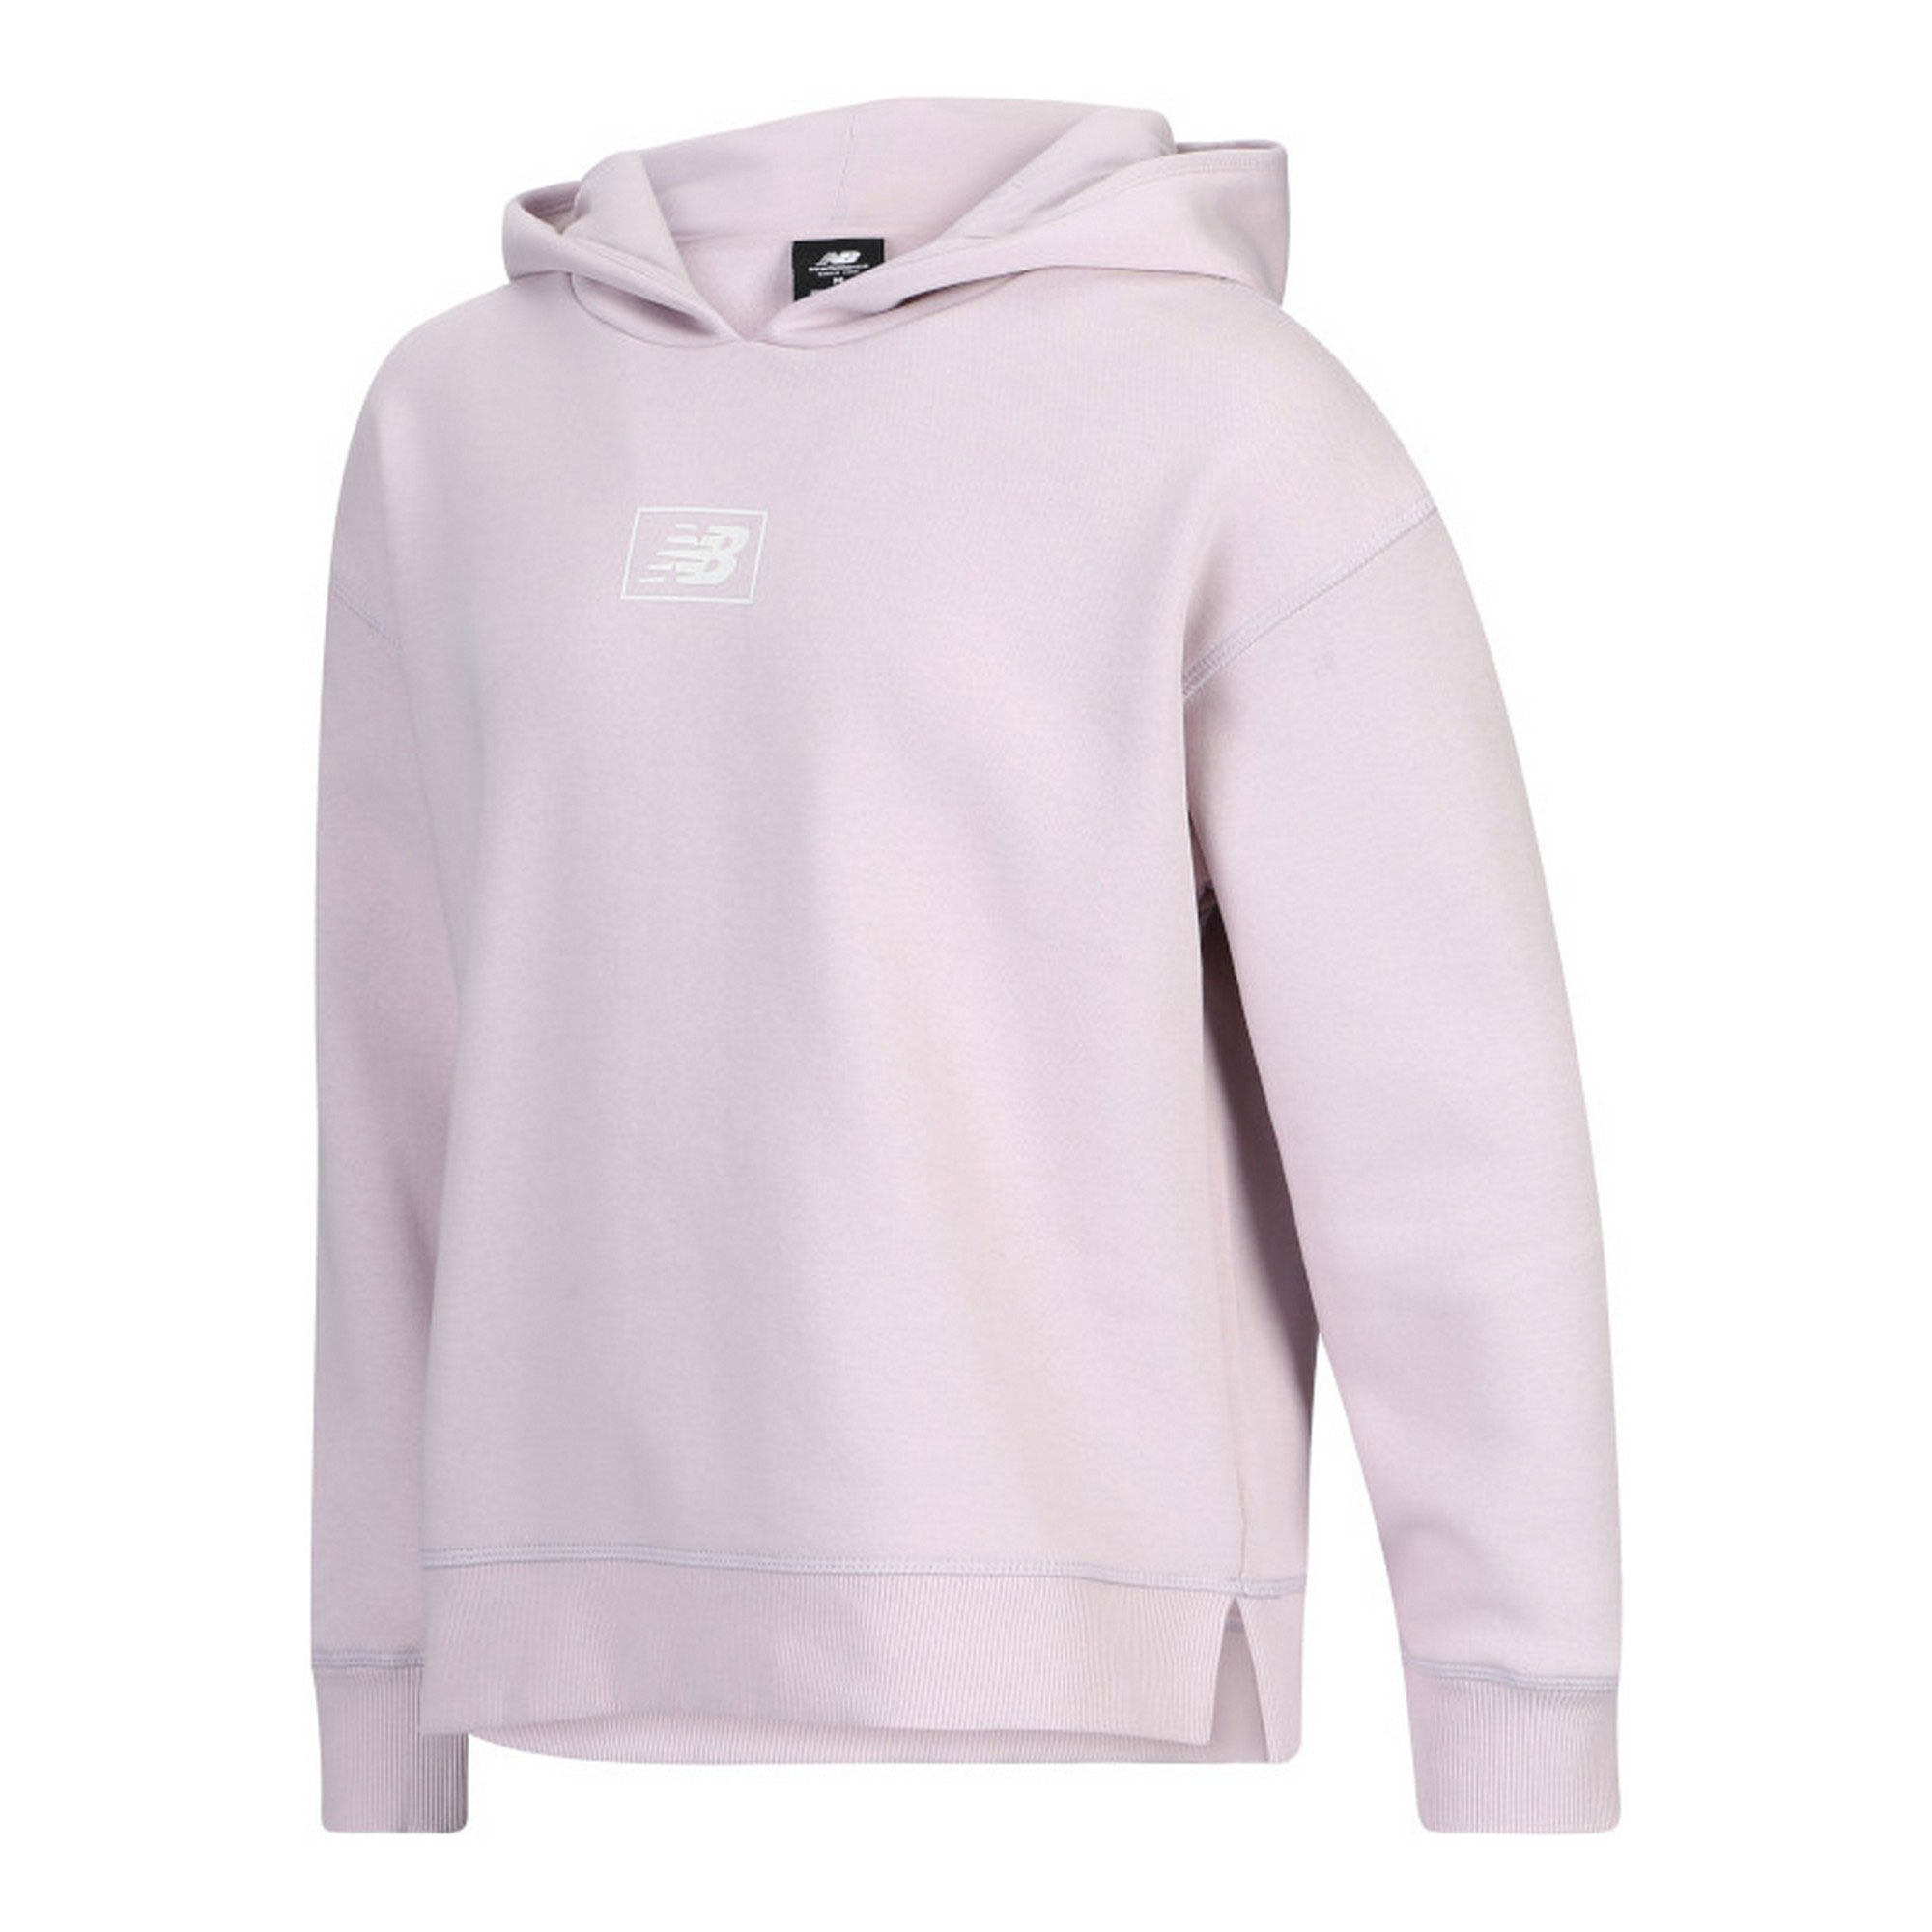 New Balance Girls Essentials French Terry Hoody